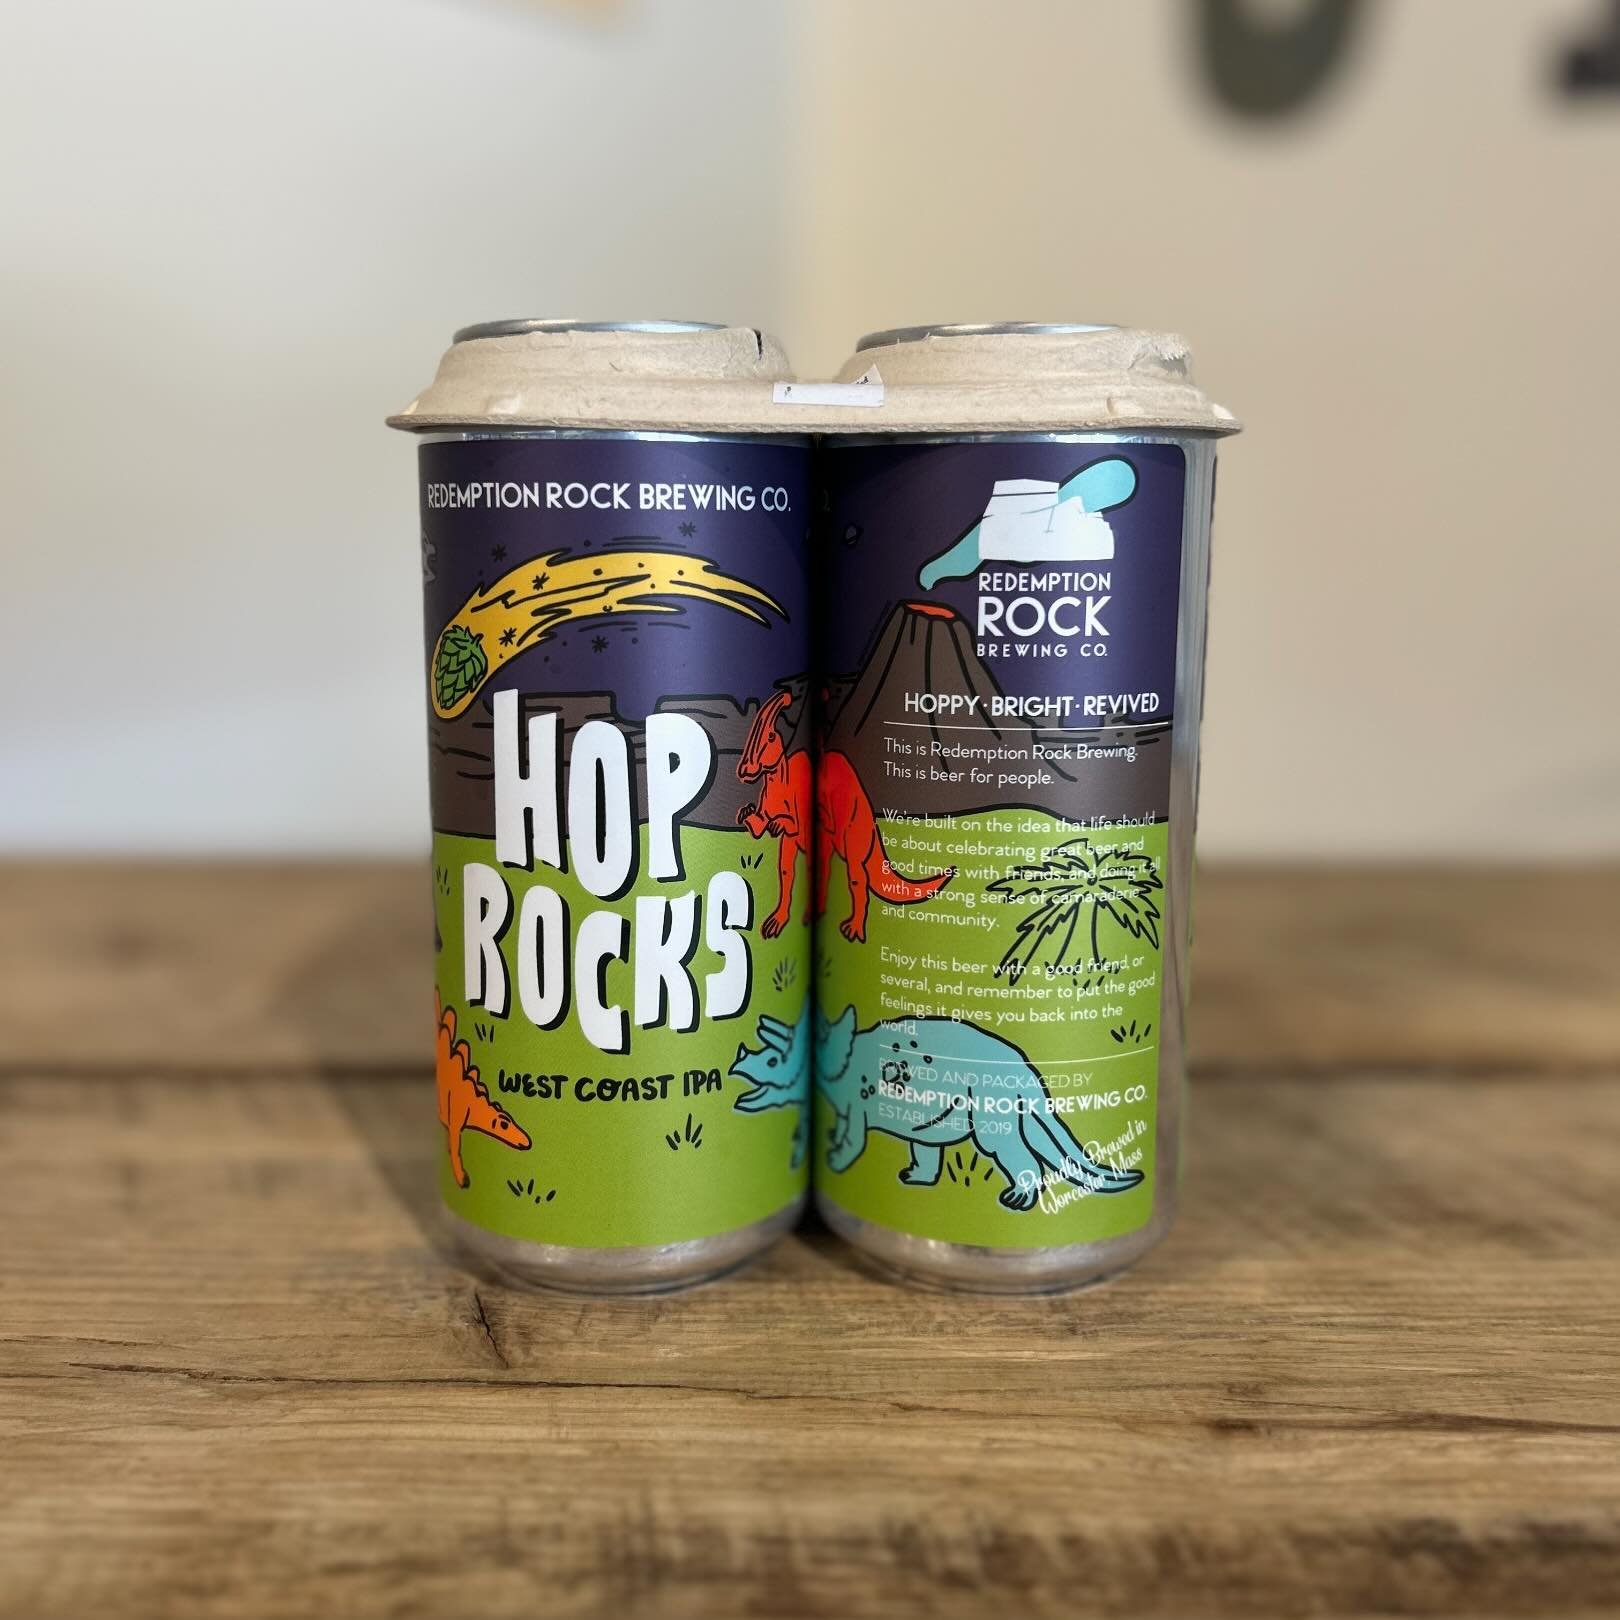 @rr_brewingco is back in the shop this week #NowAvailable #SudburyCraftBeer #DrinkLocal
&mdash;
Hop Rocks // West Coast IPA // 7% ABV

Brewed with Amarillo, Mosaic, and Chinook hops. Hop Rocks features a massively dank and piney aroma with hints of g